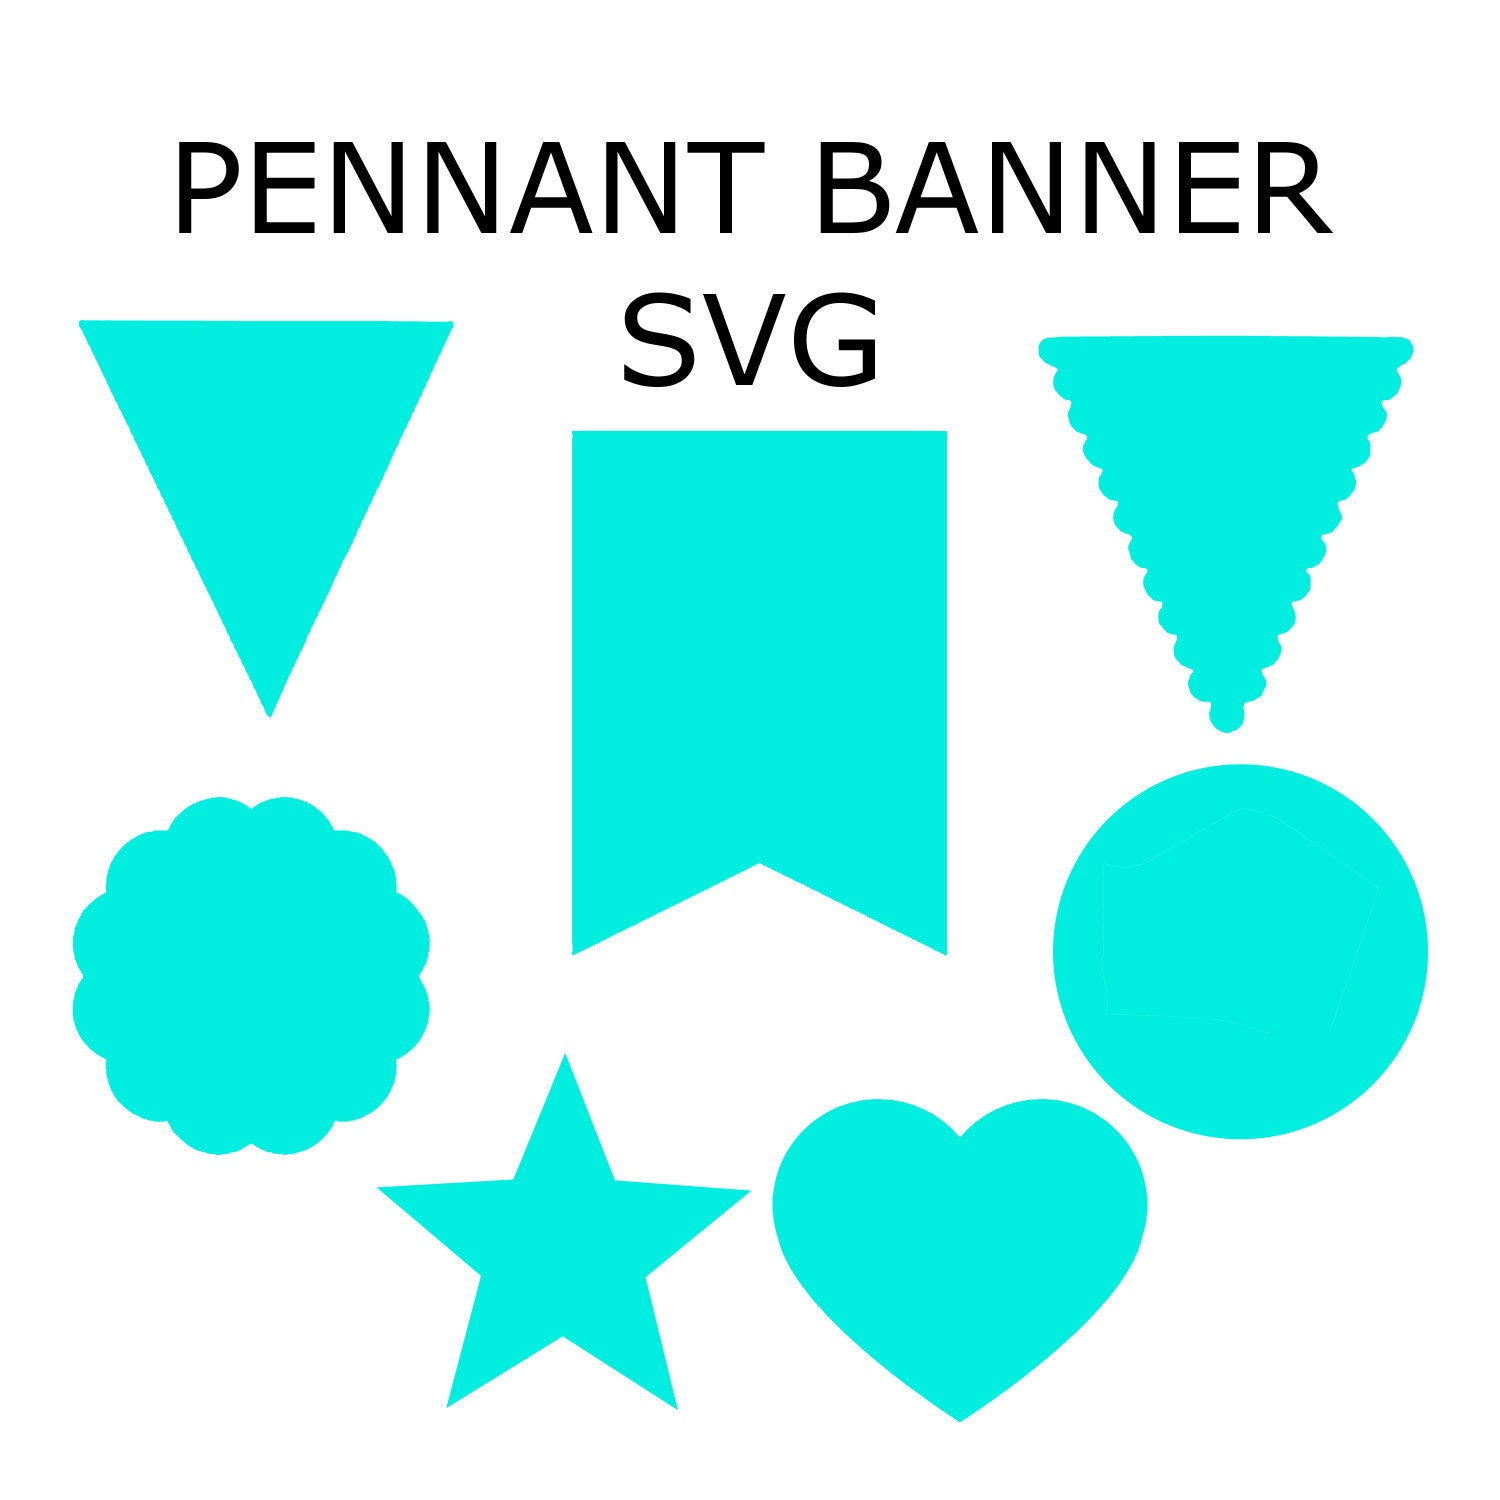  Banner Pennant SVG Set of 7 simple shapes Cutting File